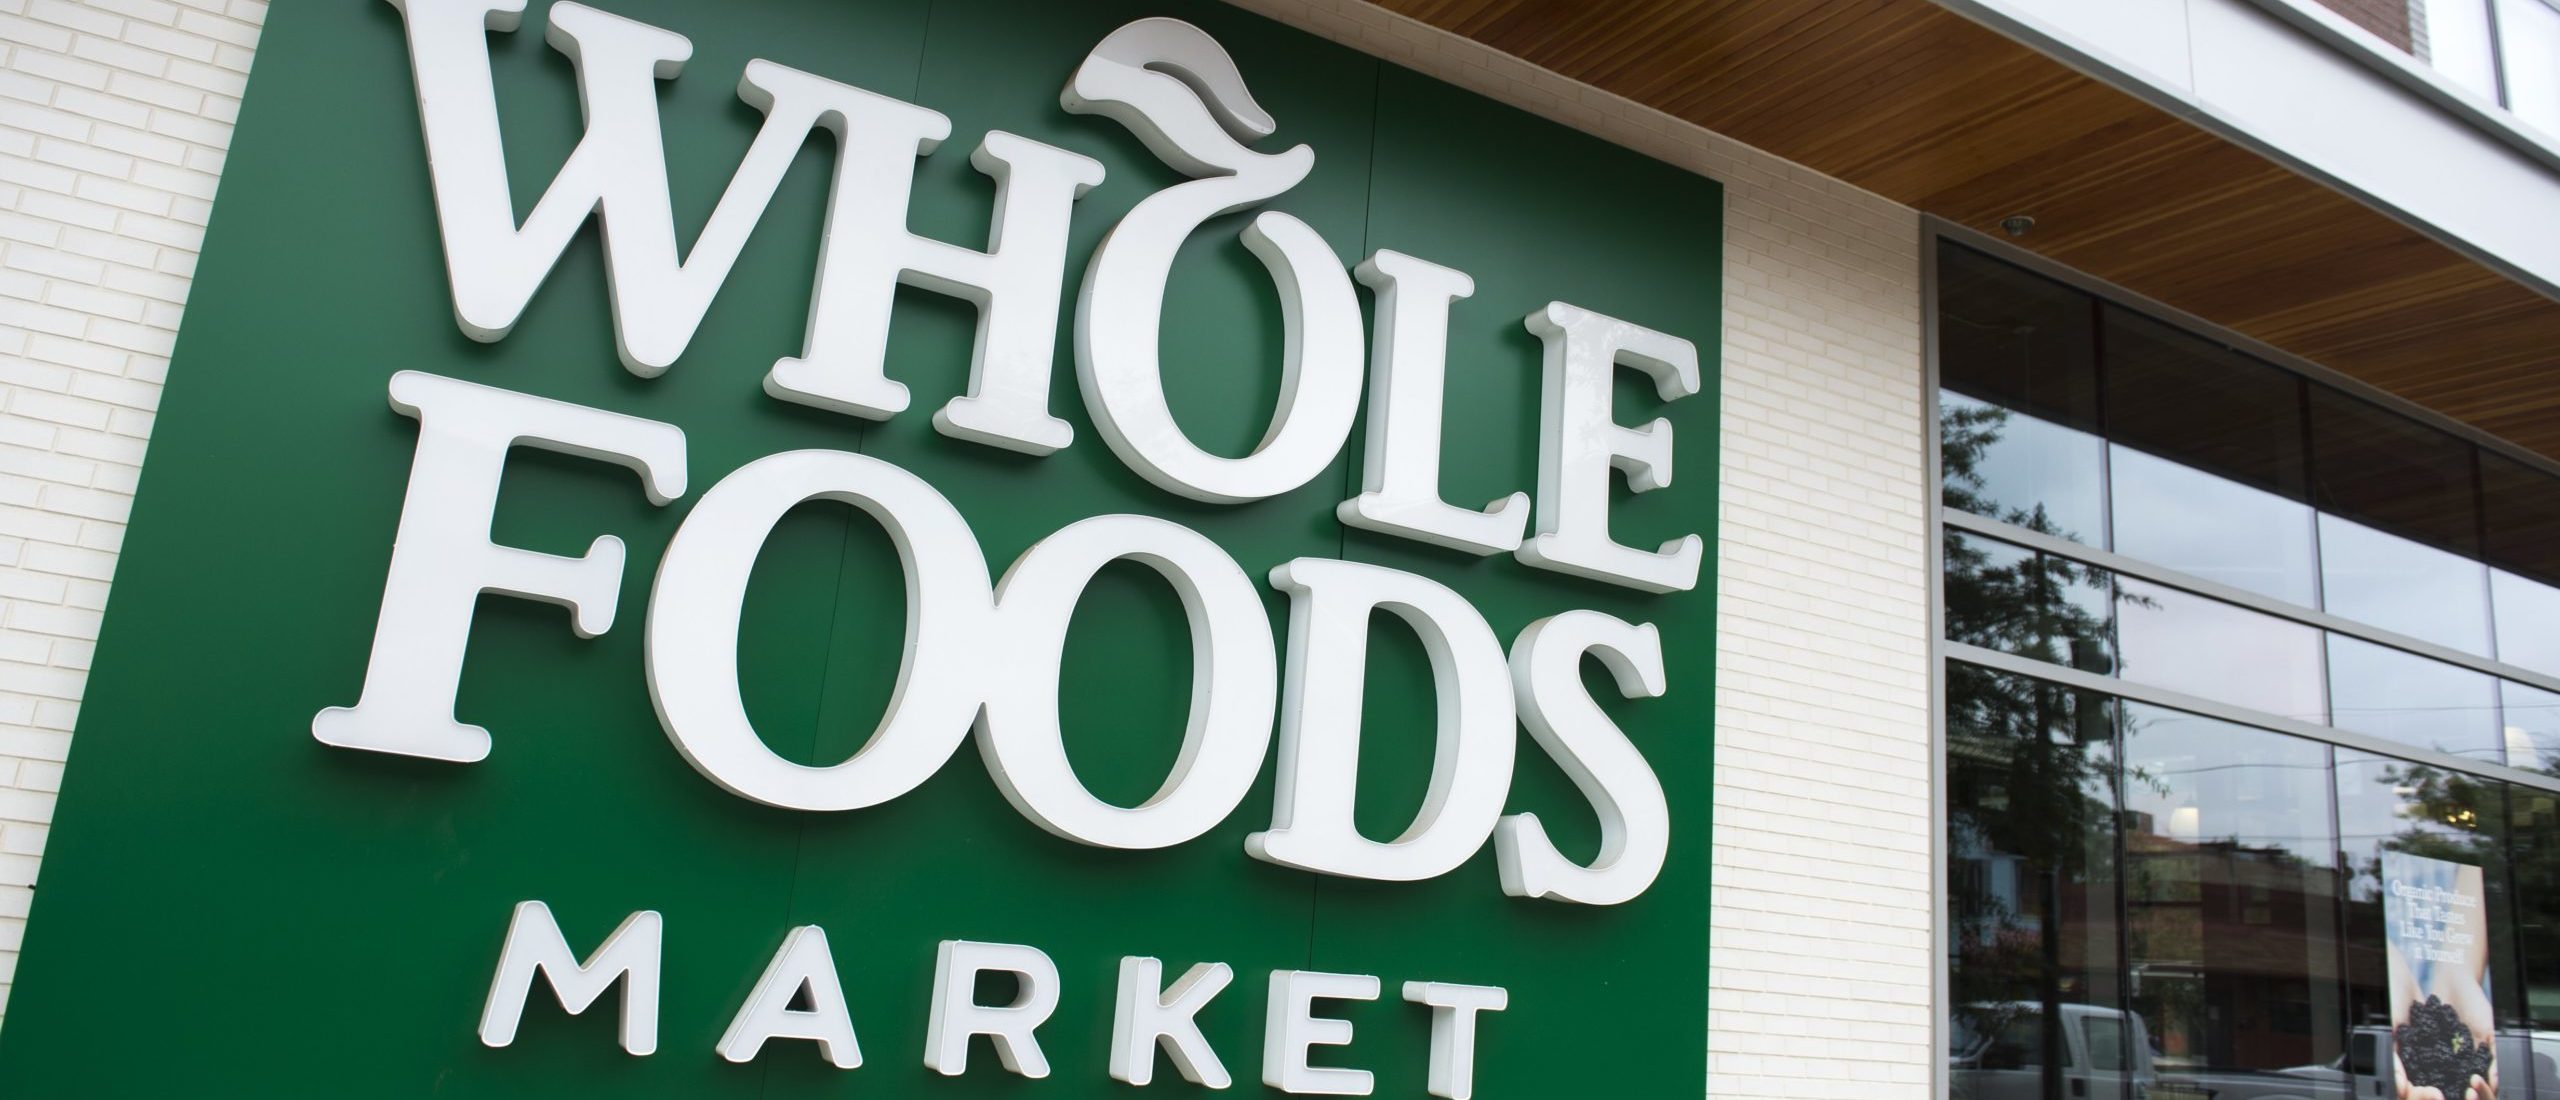 A Whole Foods Market sign is seen in Washington, DC, June 16, 2017, following the announcement that Amazon would purchase the supermarket chain for $13.7 billion. - Amazon is once again shaking up the retail sector, with the announcement it will acquire upscale US grocer Whole Foods Market, known for its pricey organic options, in a deal that underscores the online giant's growing influence in the economy.